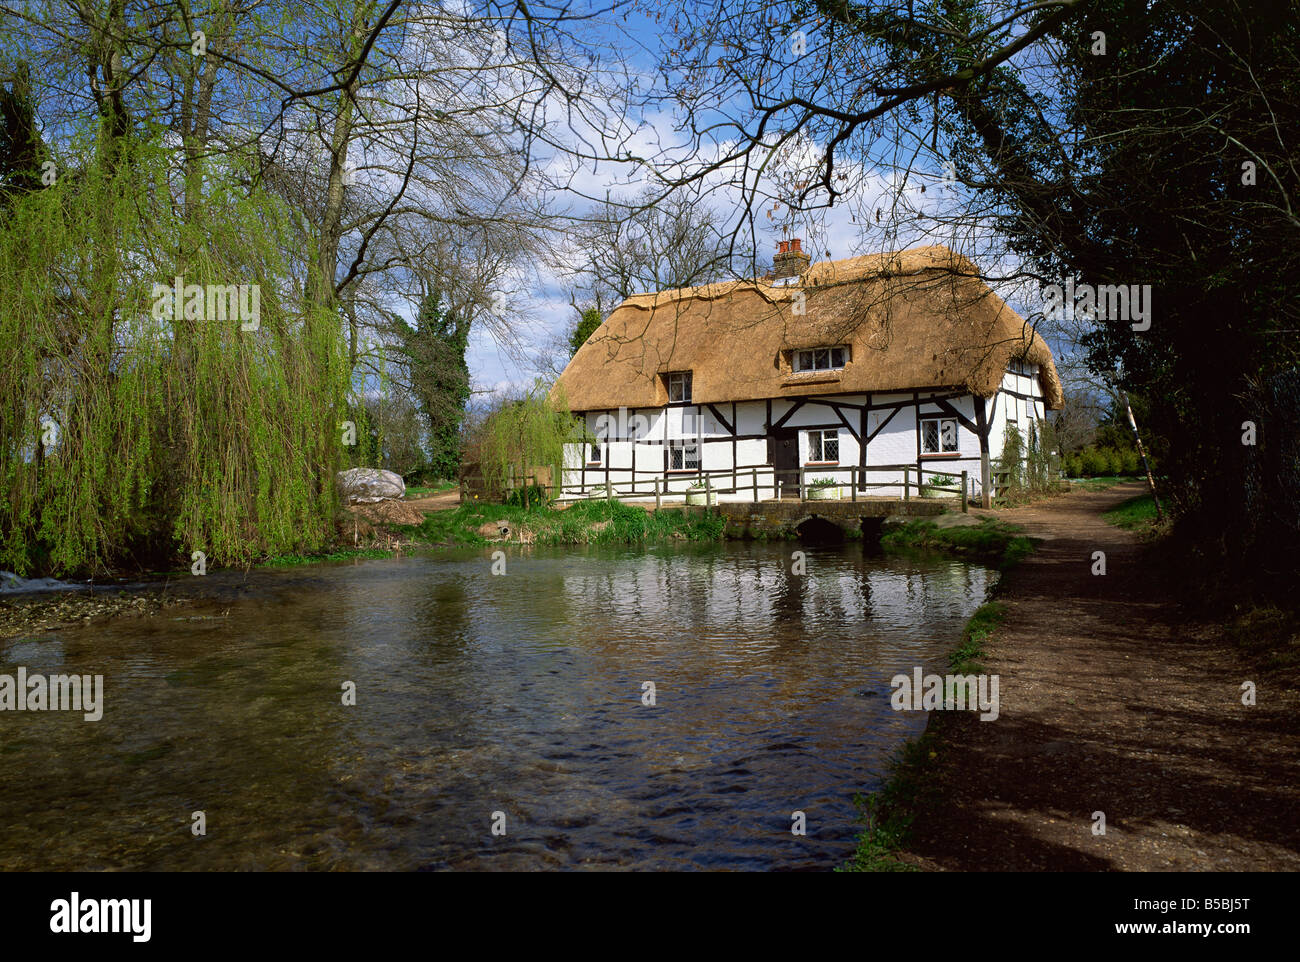 Riverside cottage de chaume, New Alresford, Hampshire, Angleterre, Europe Banque D'Images